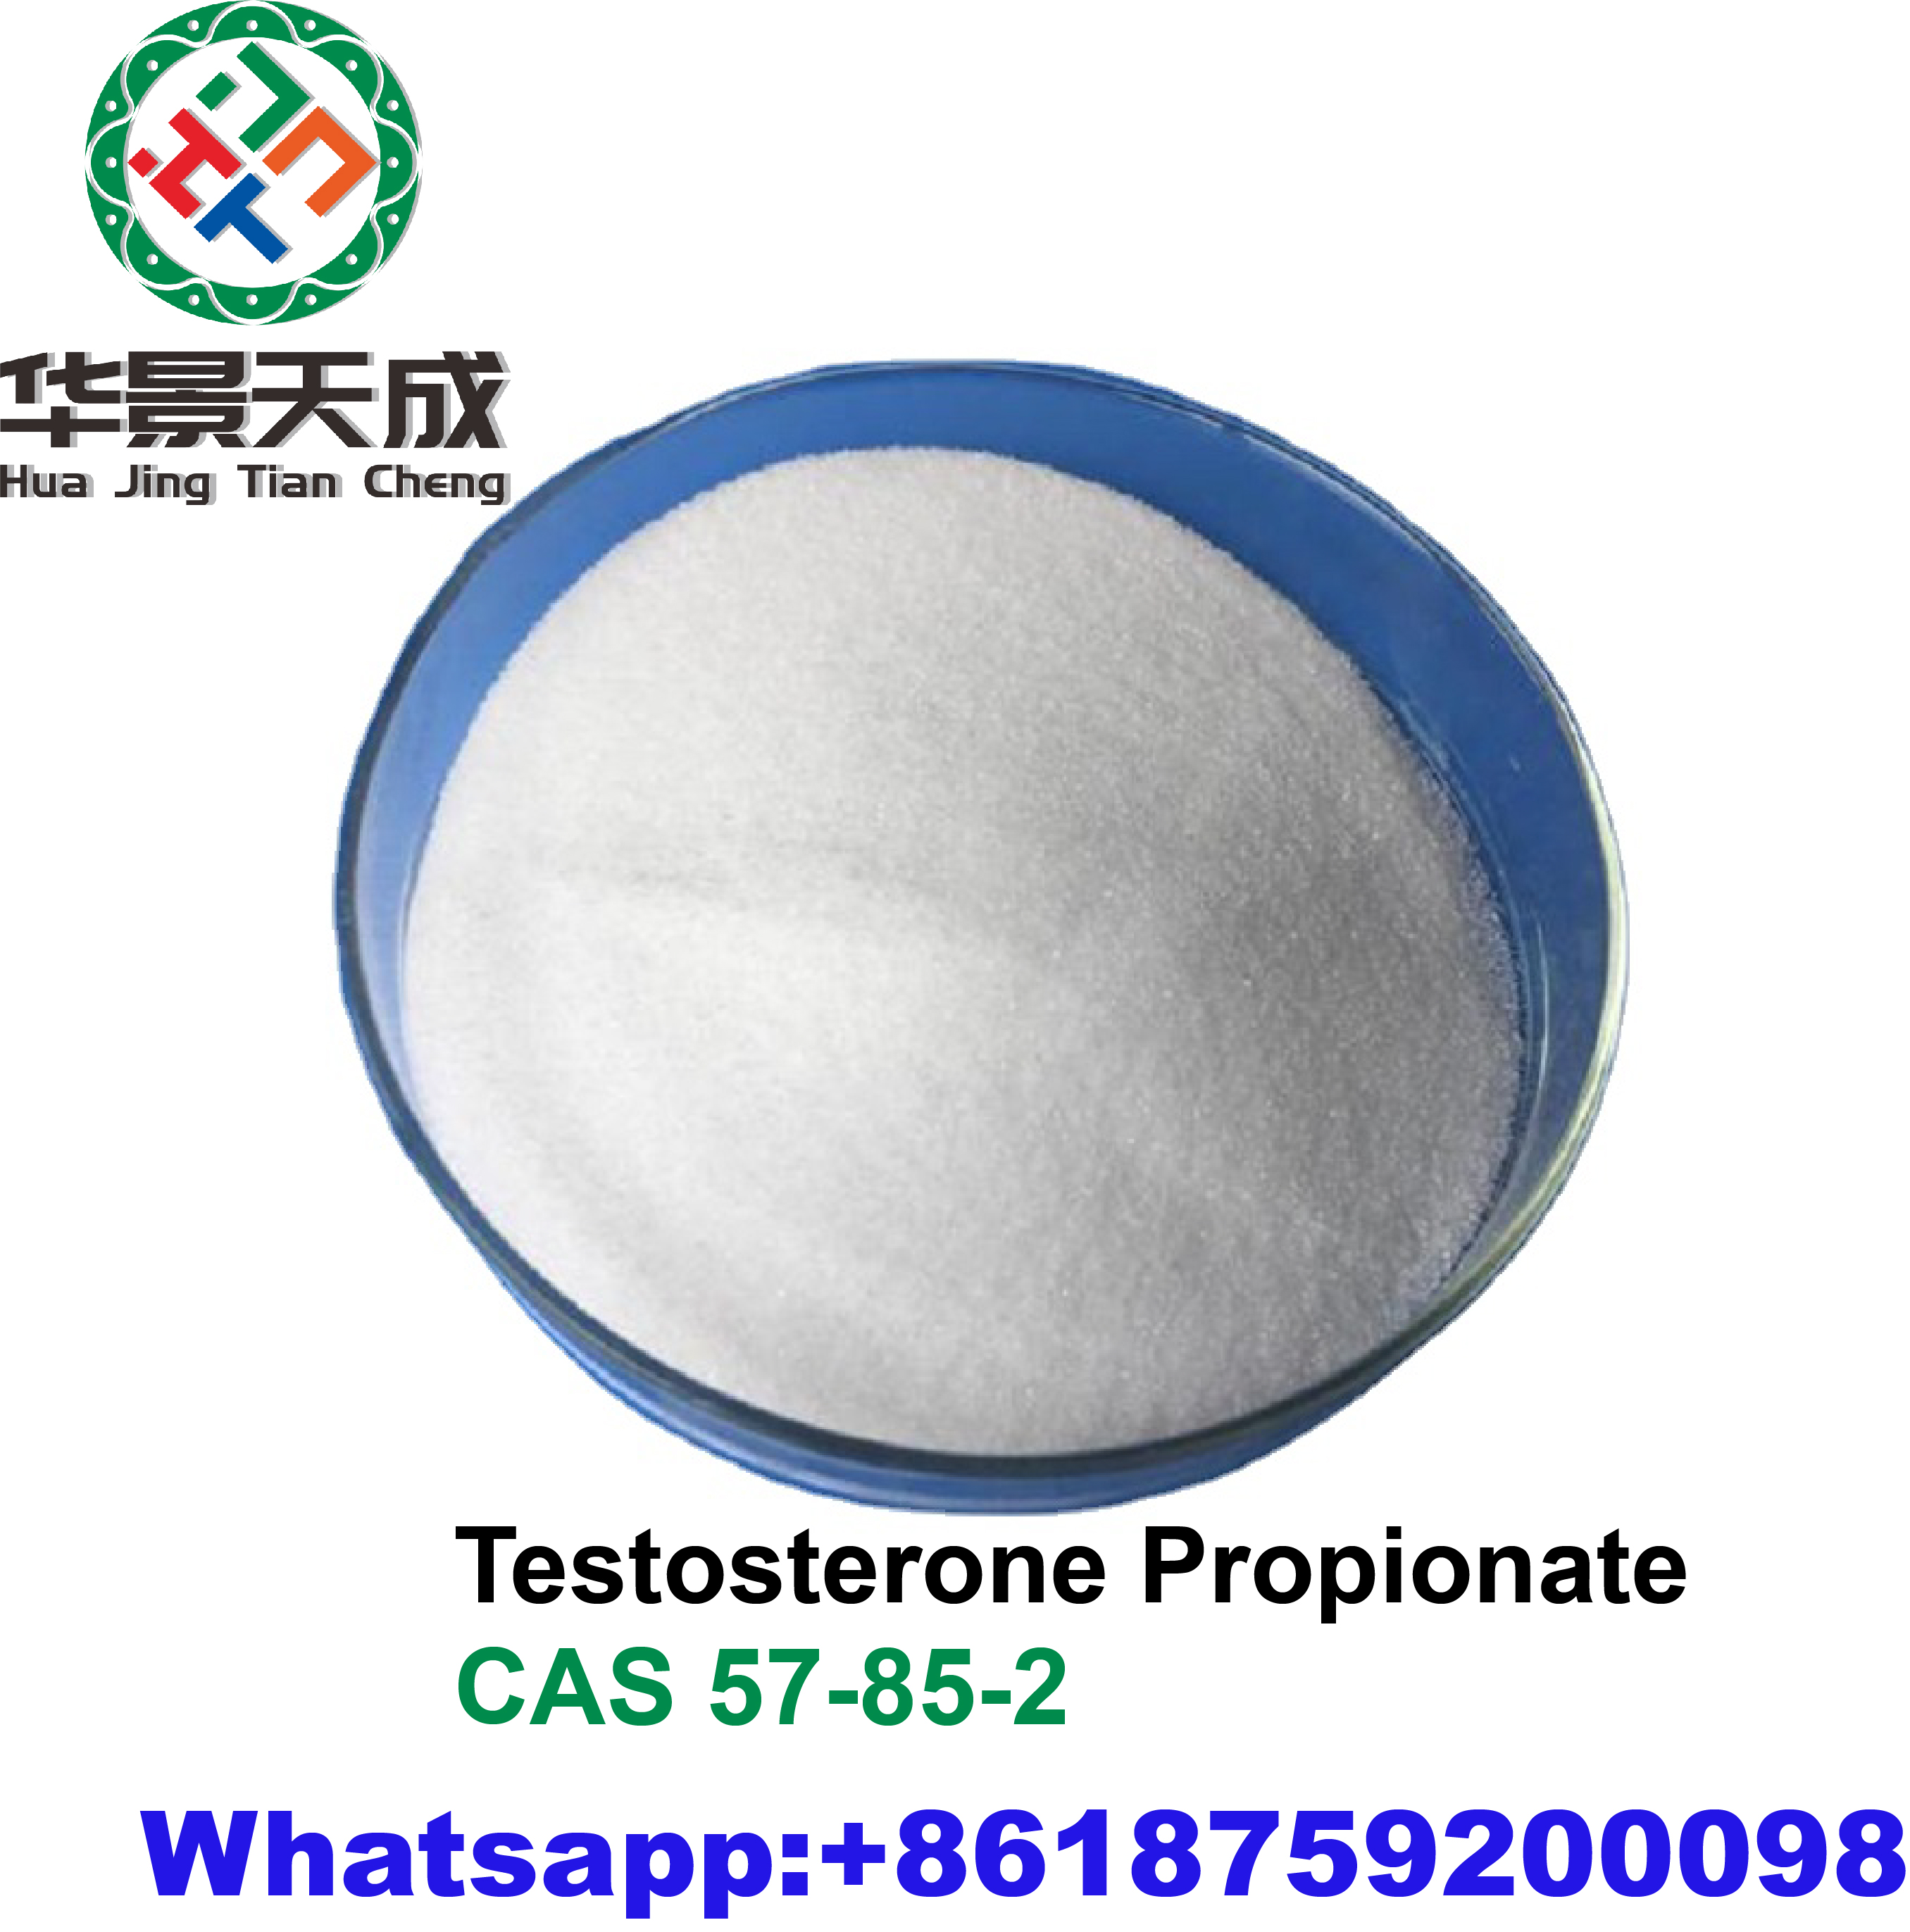 99% Purity Steroid Raw Material Powder Test Prop for Enhancing Strength Bodybuilding Raw Powder Featured Image